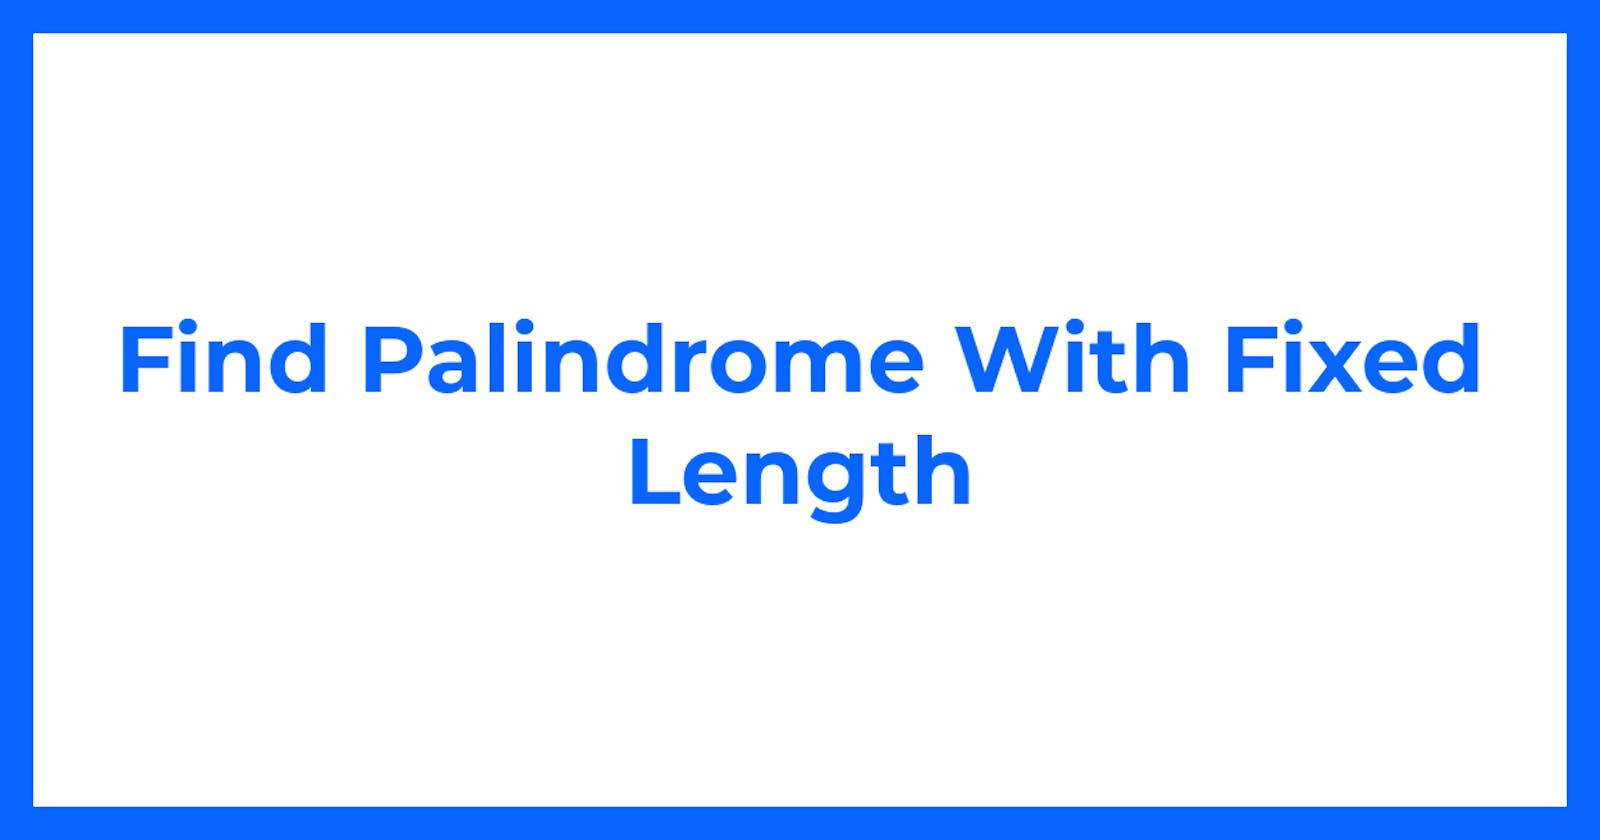 Find Palindrome With Fixed Length